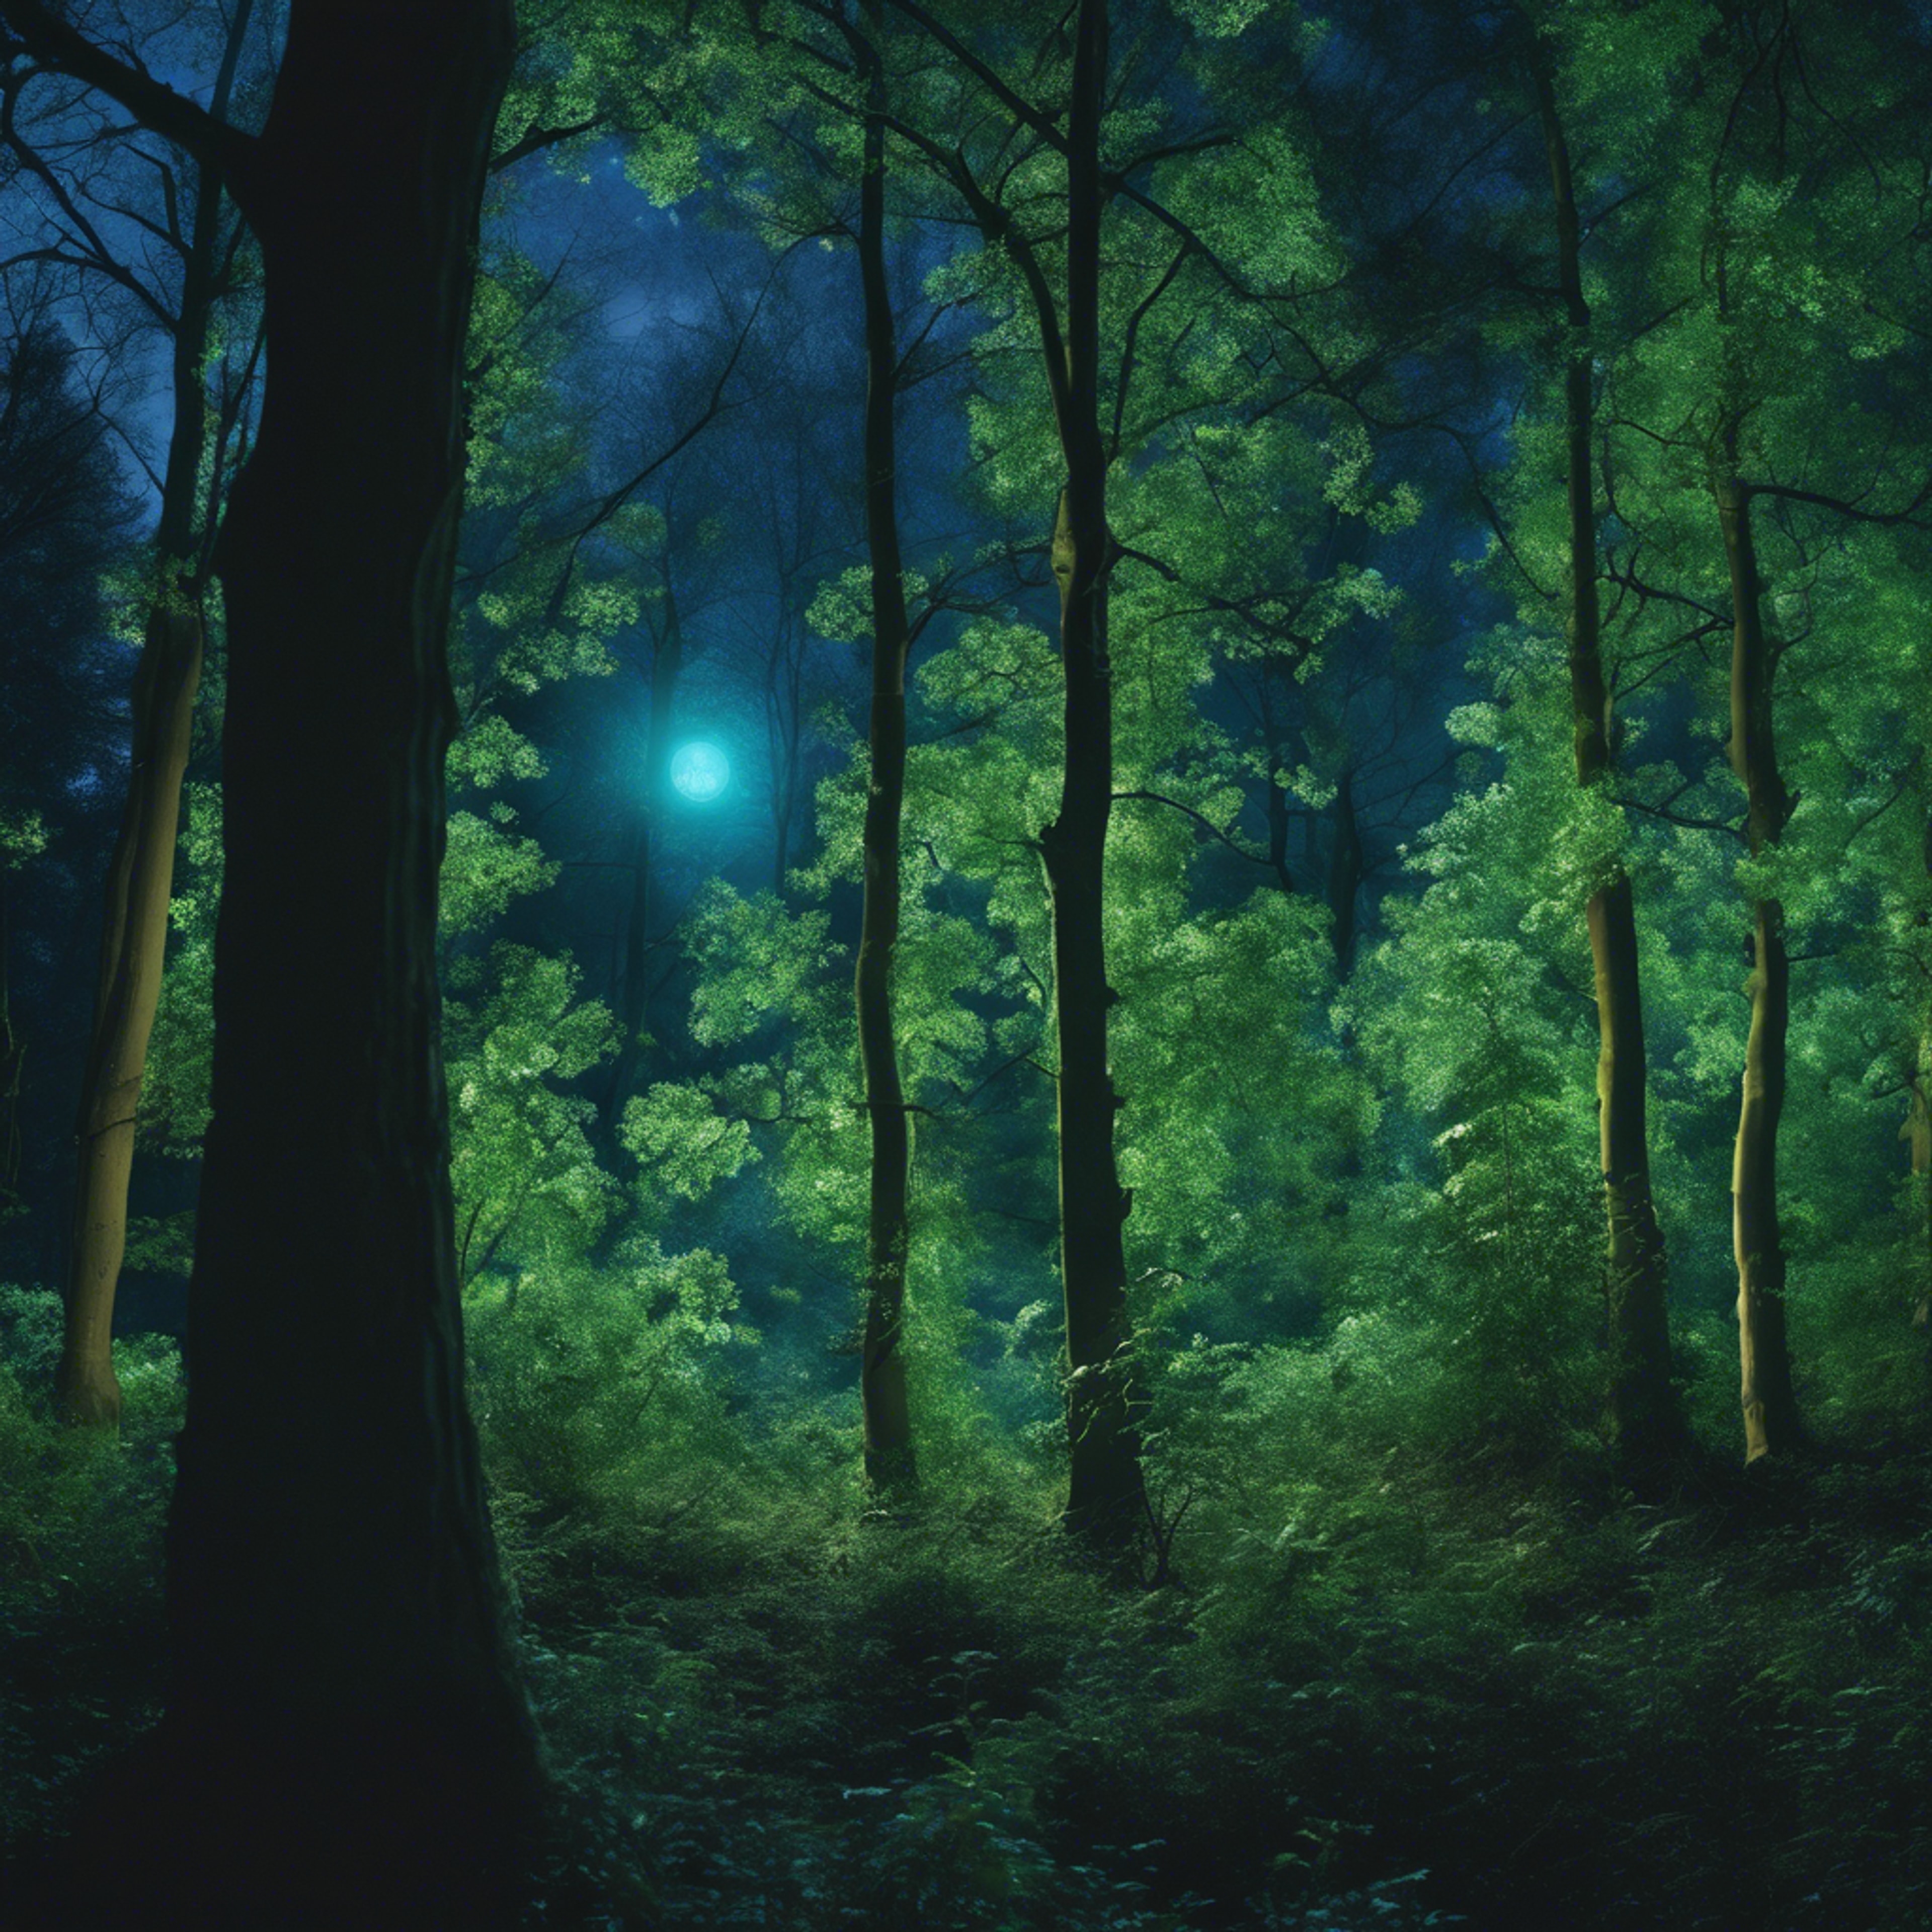 A mysterious green forest illuminated by the light of a full, bright blue moon. Tapeta[93934147fb2e44e3af4b]